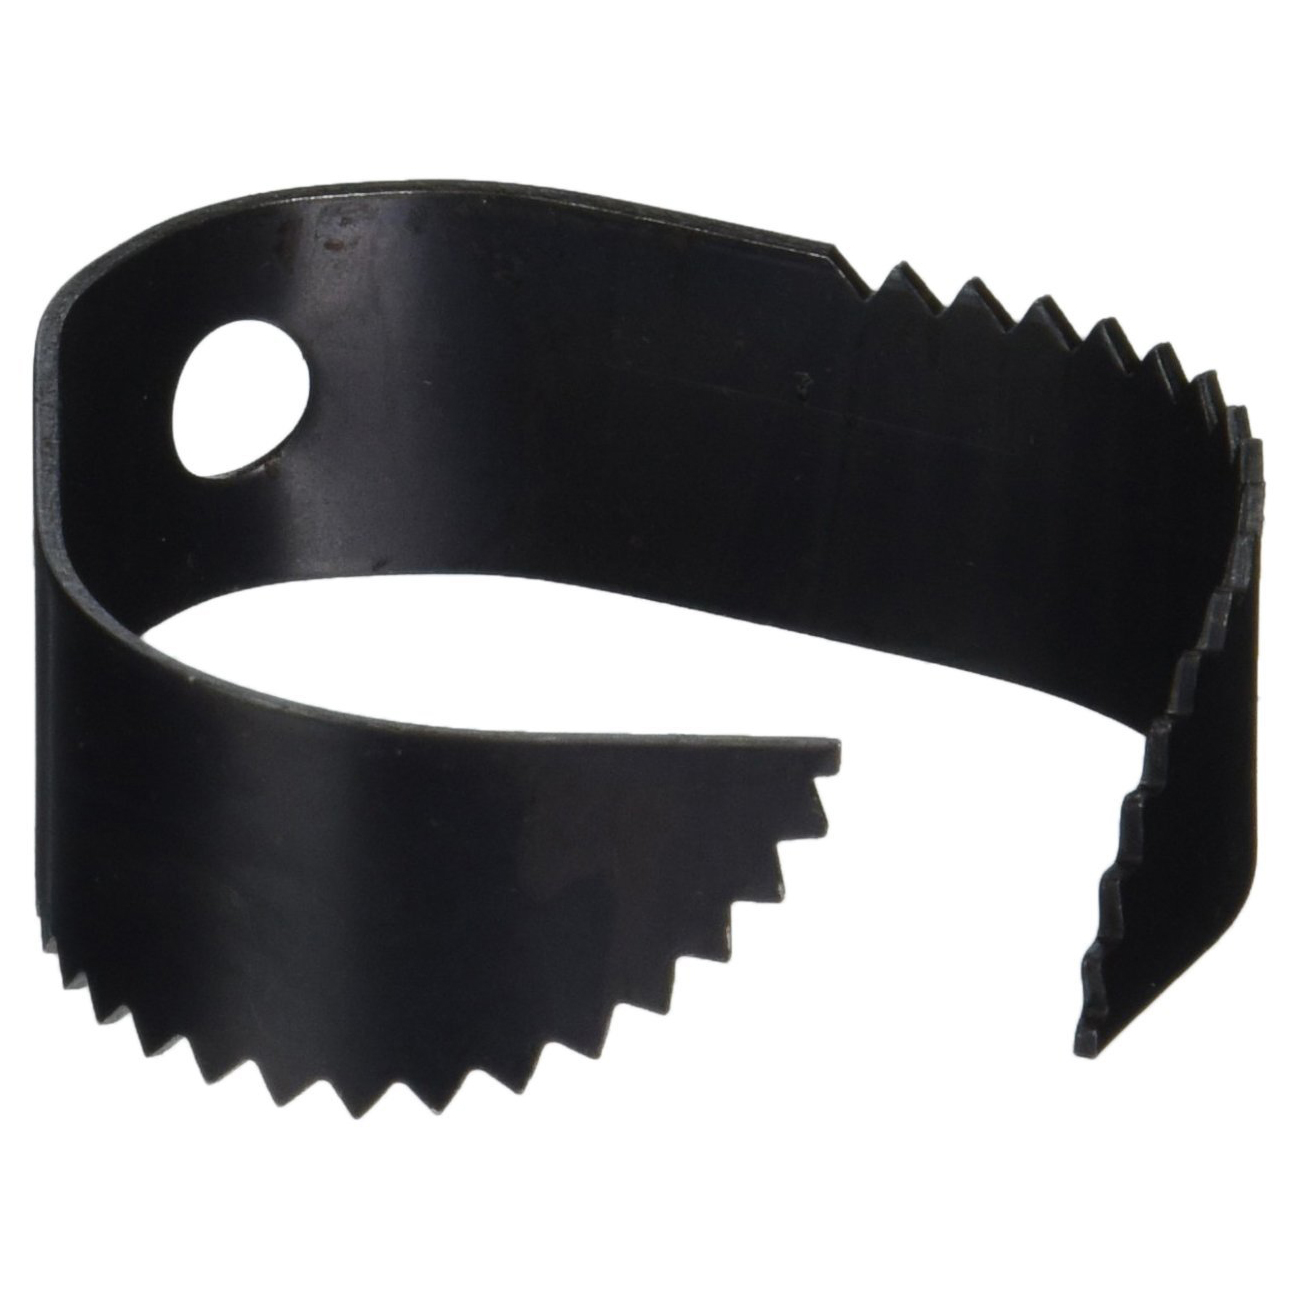 BLADE 3 92825 REPLACEMENT FOR T-413 DOUBLE CUTTER